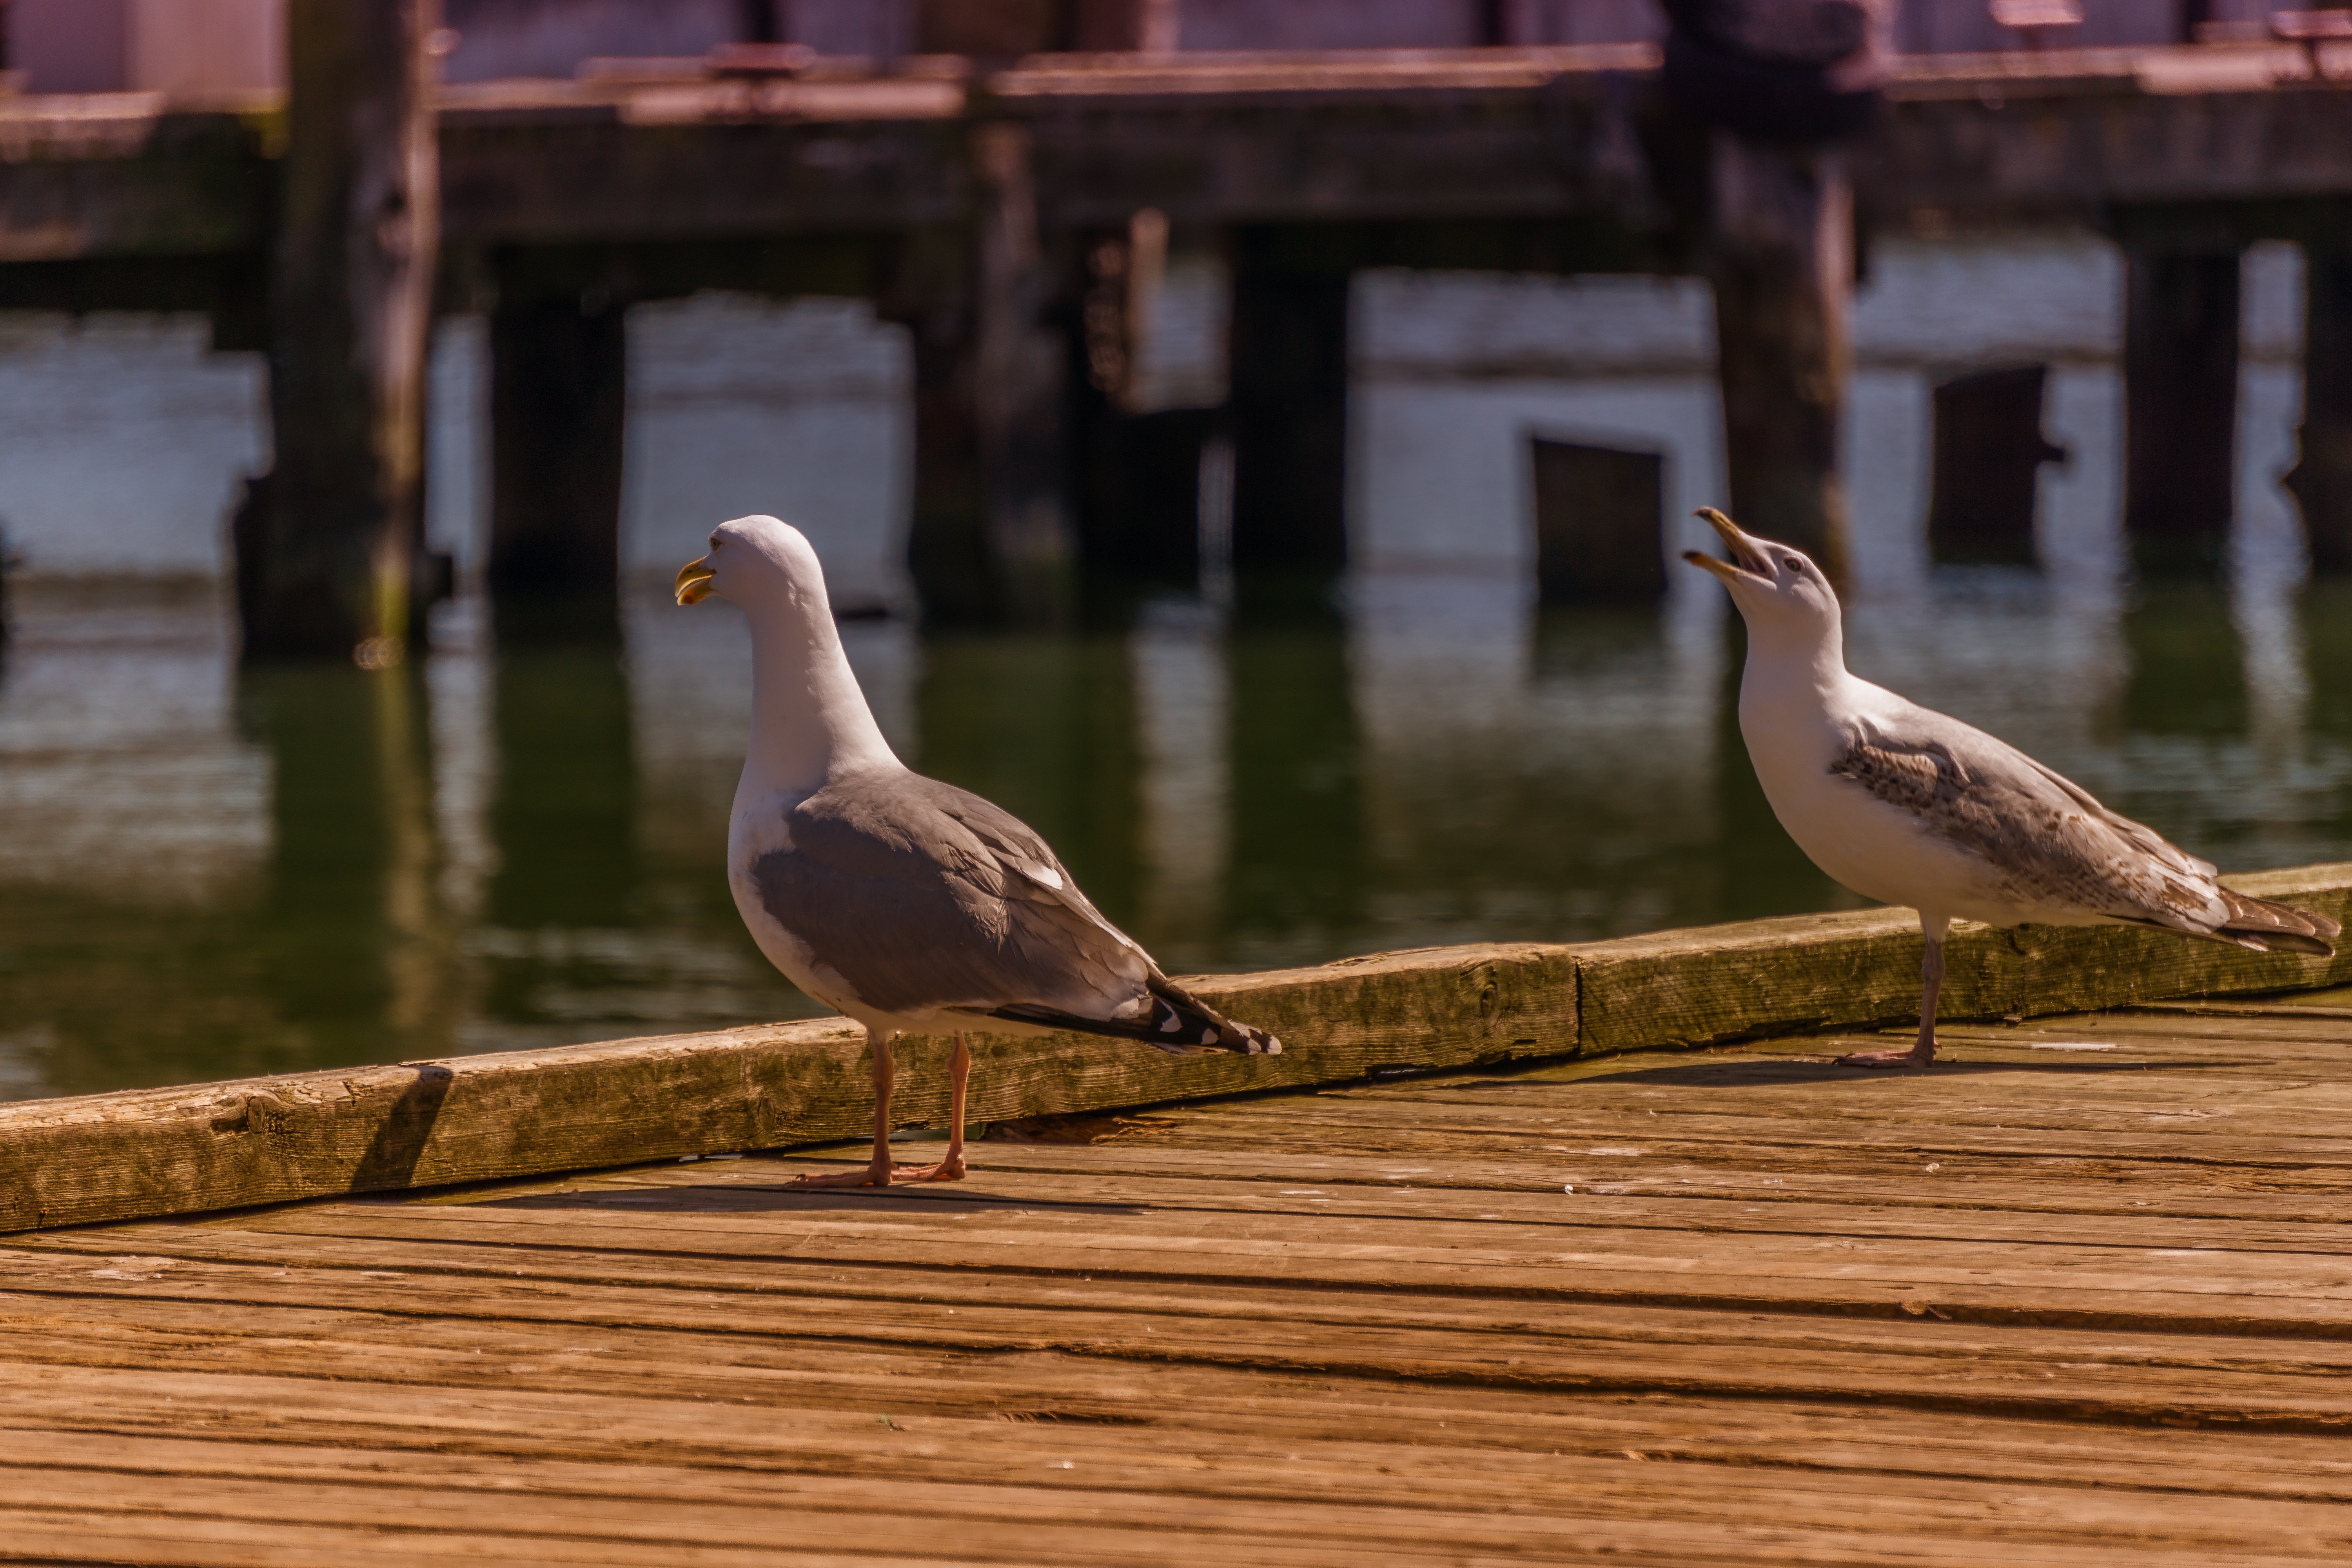 2 white and grey seagulls